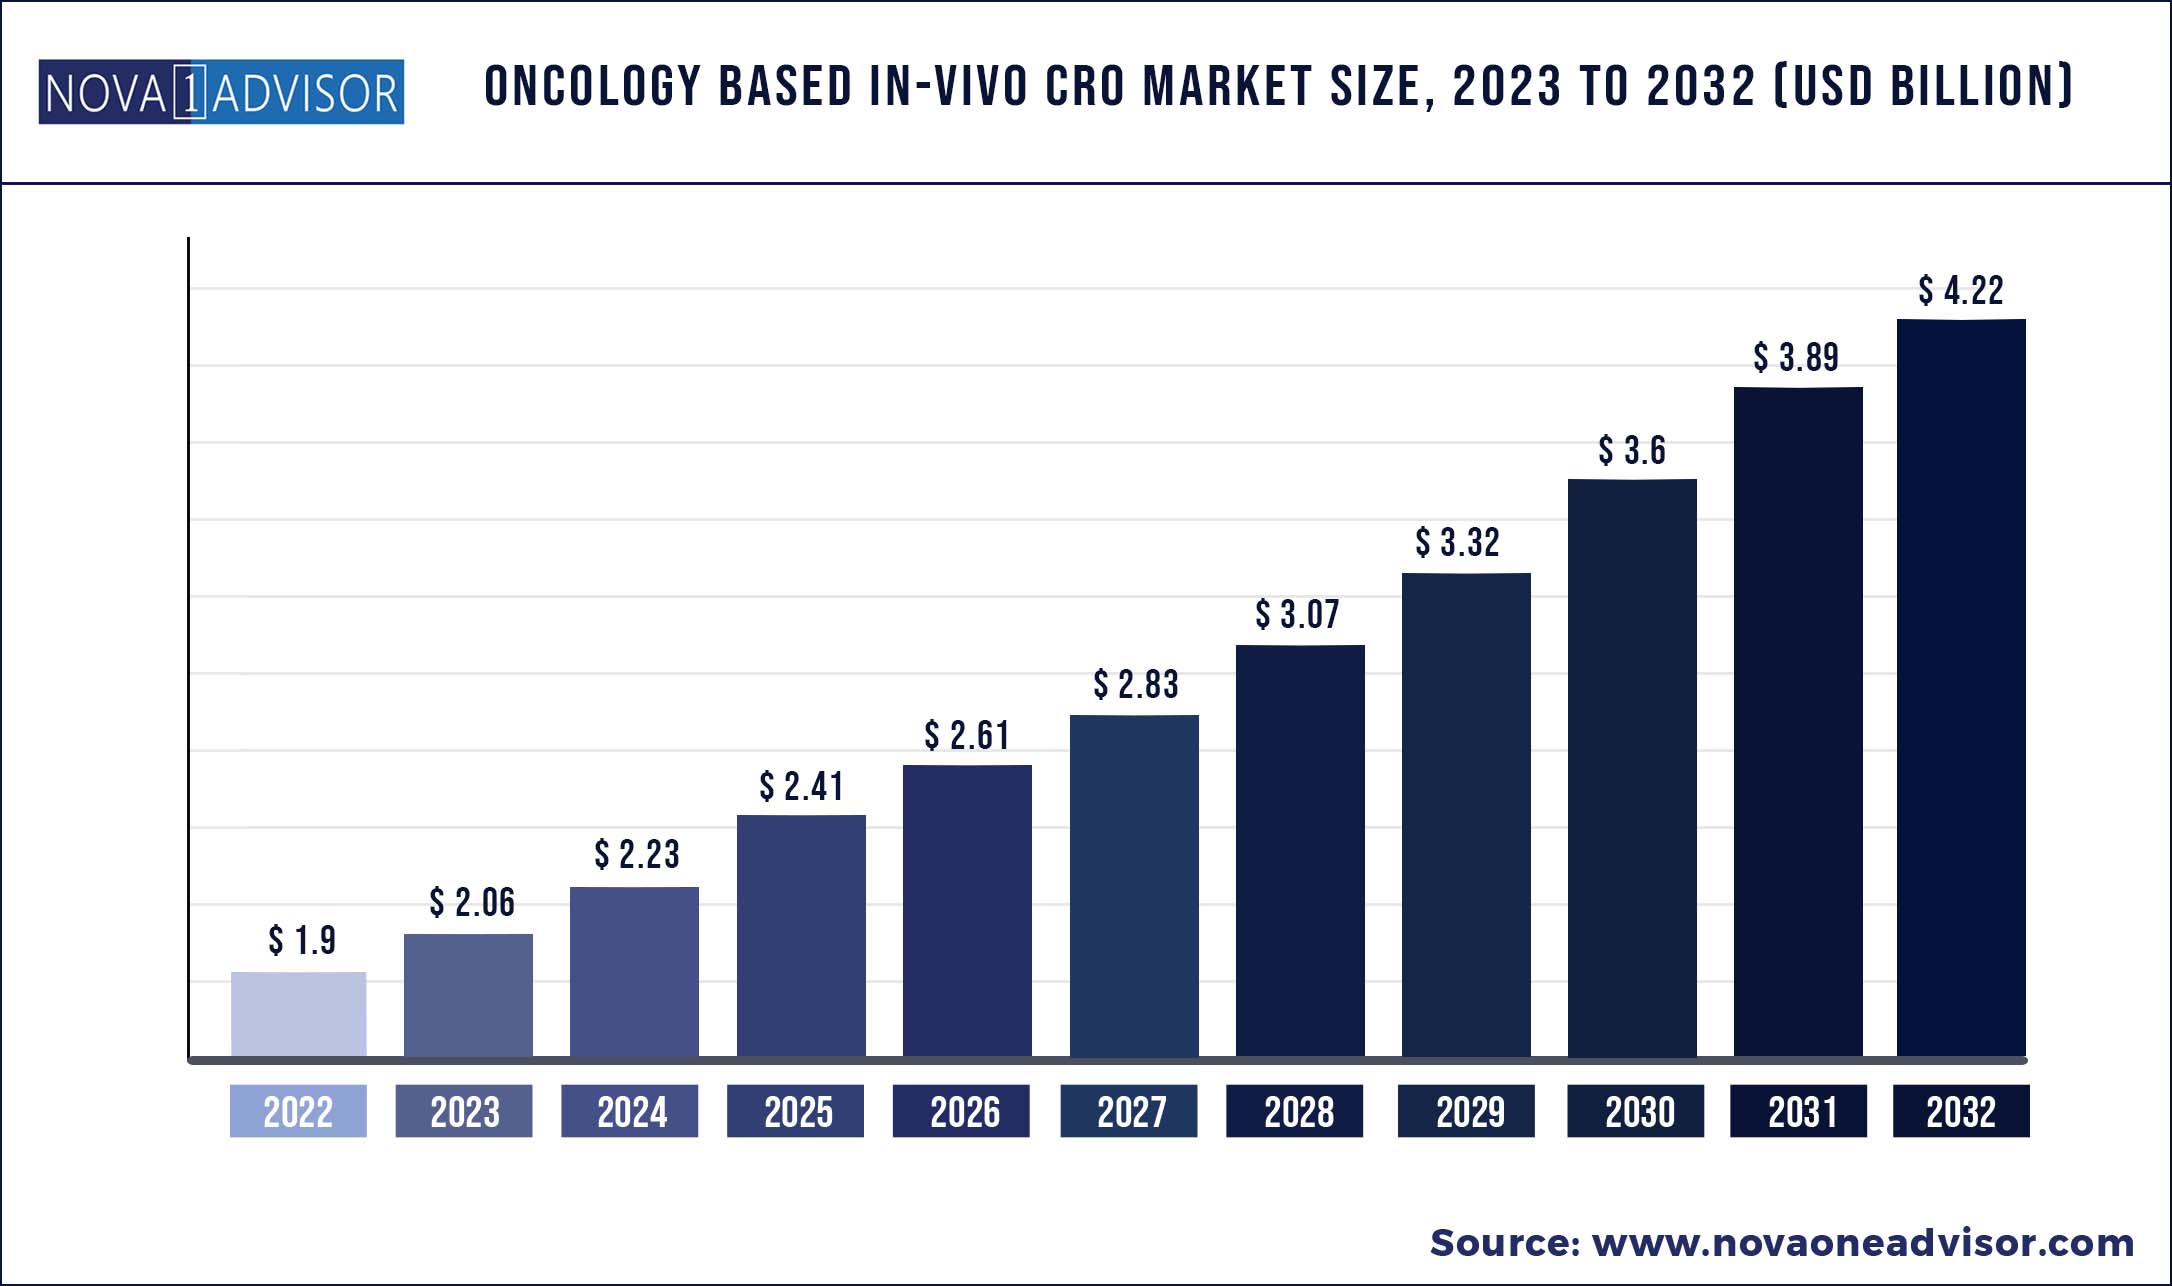 Oncology Based In-vivo CRO Market Size